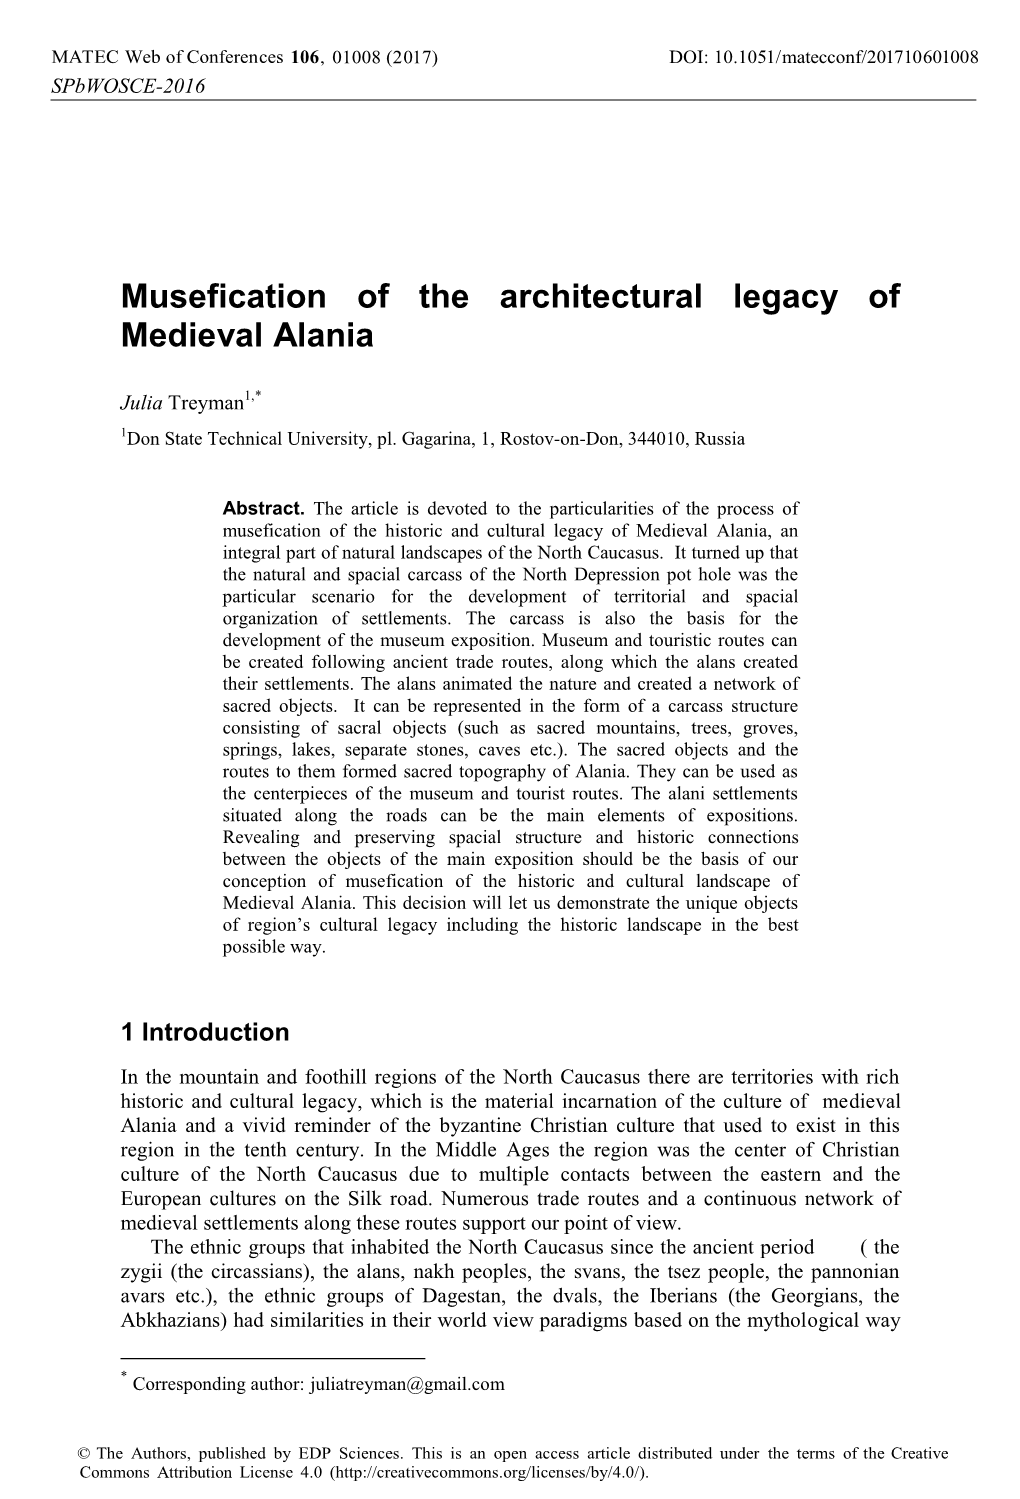 Musefication of the Architectural Legacy of Medieval Alania